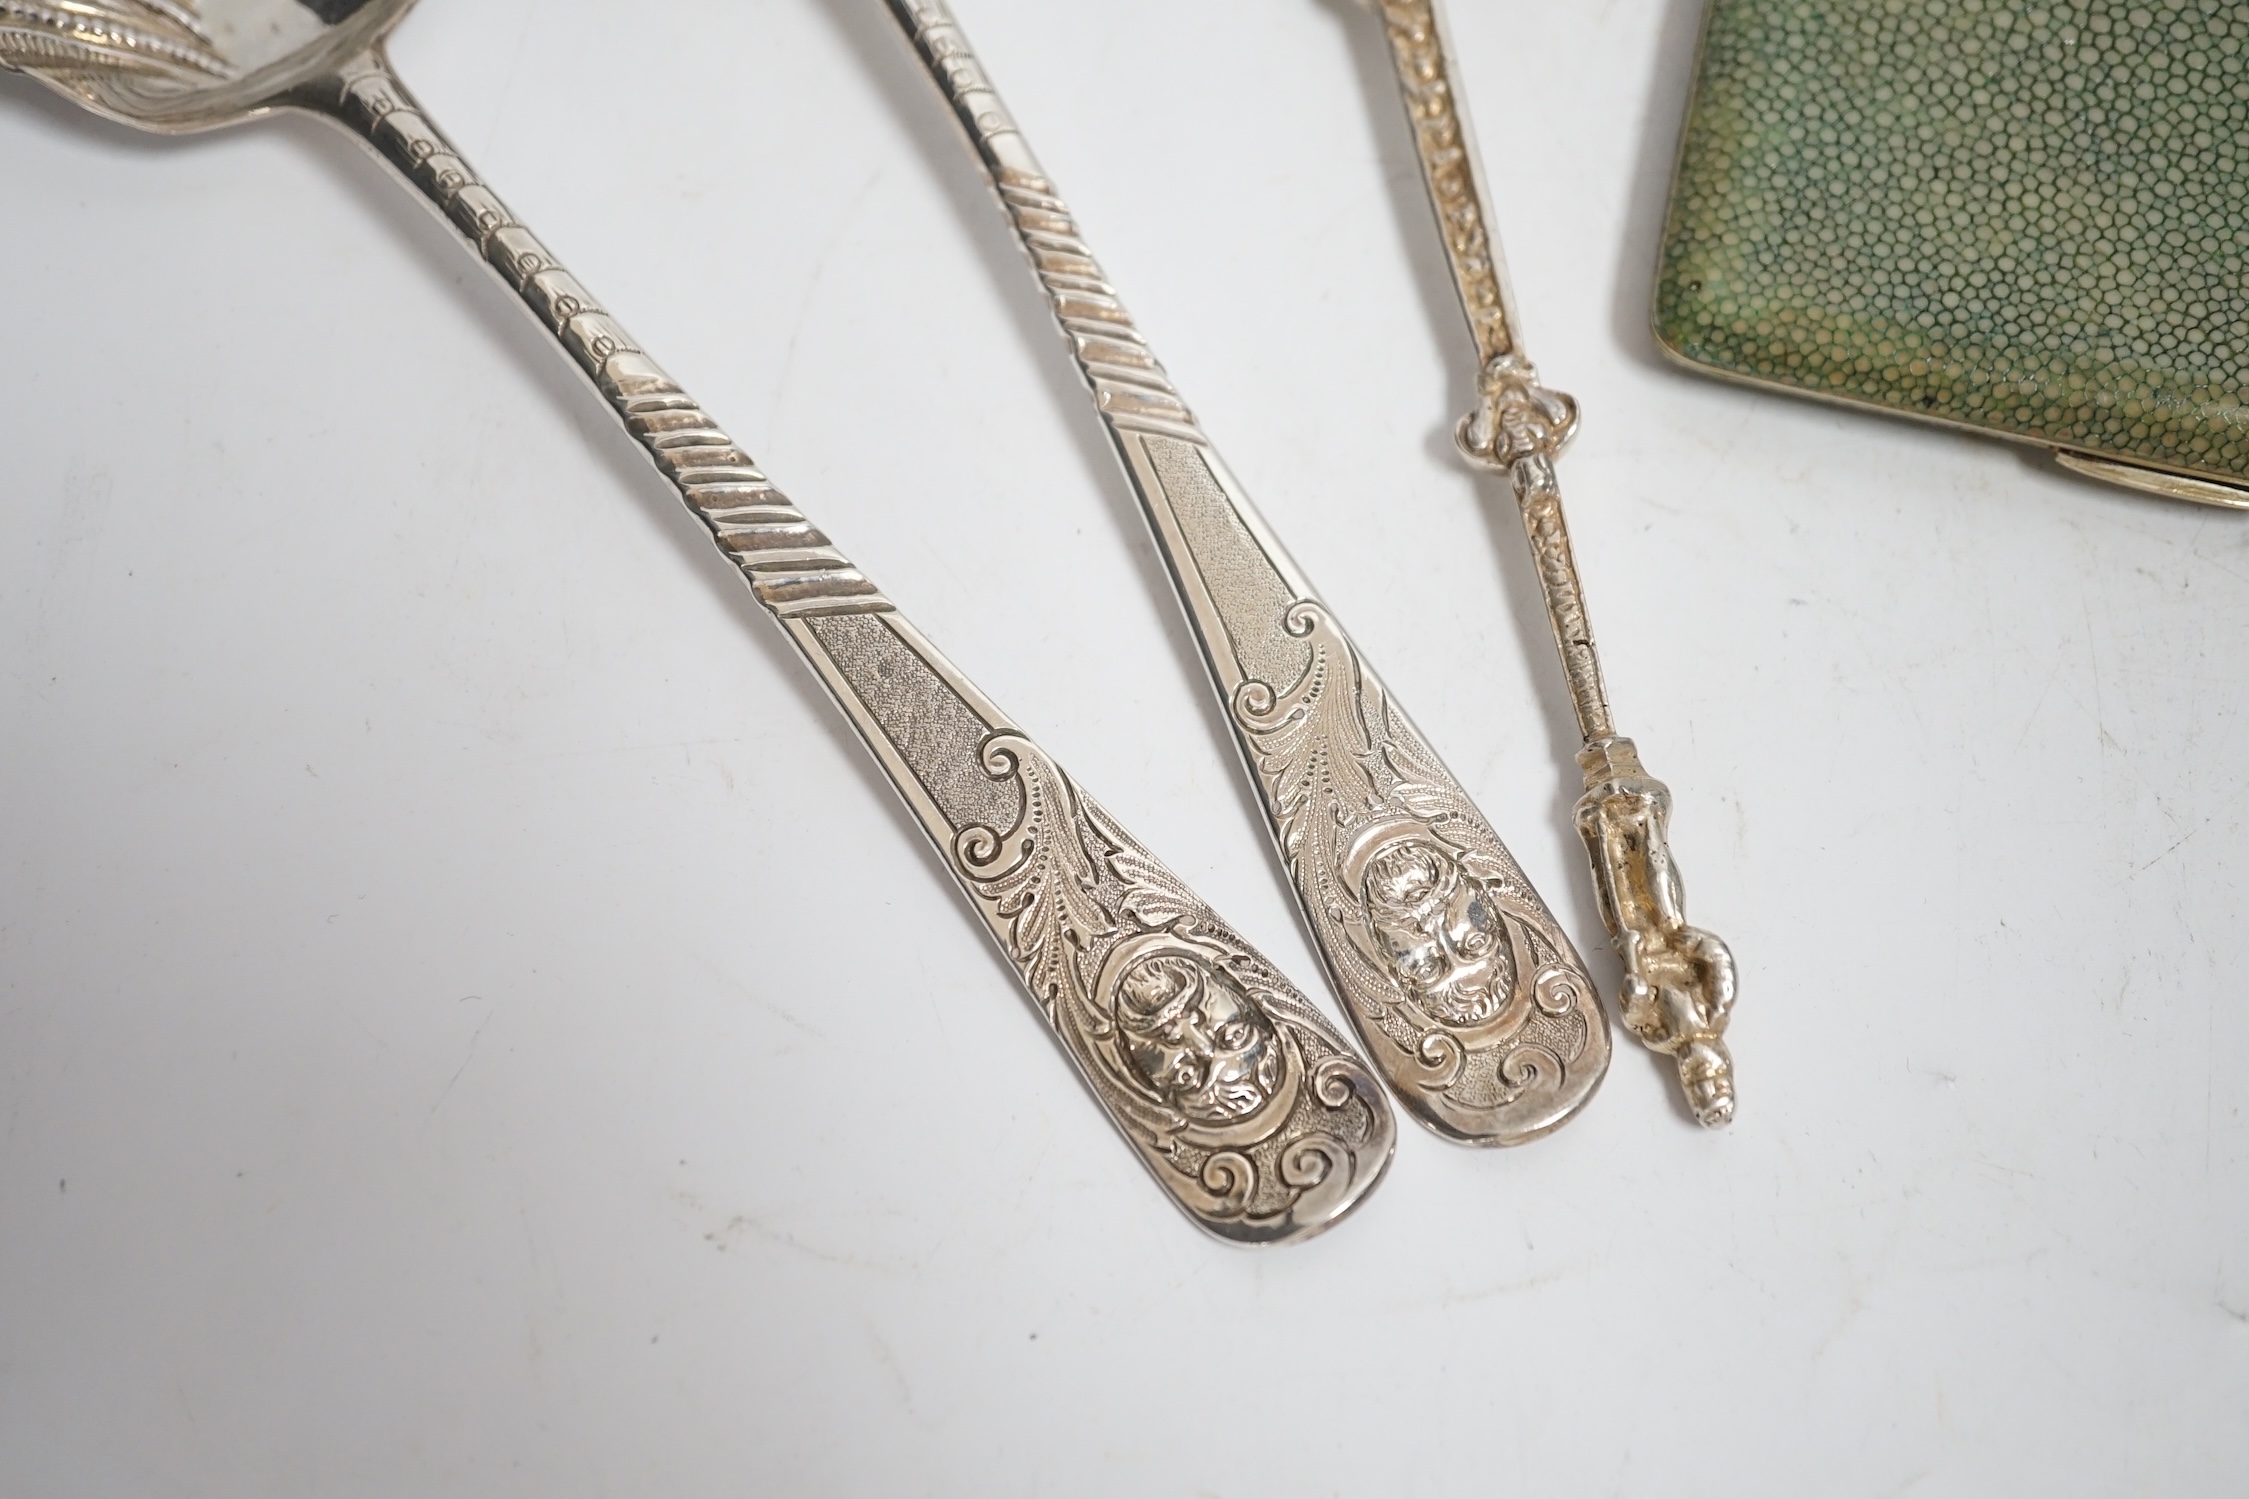 A George III Scottish provincial table spoon, with later decoration, Robert Keay I, Perth, circa 1790, 22.5cm, together with a George III silver table spoon with similar decoration, a continental white metal spoon and a